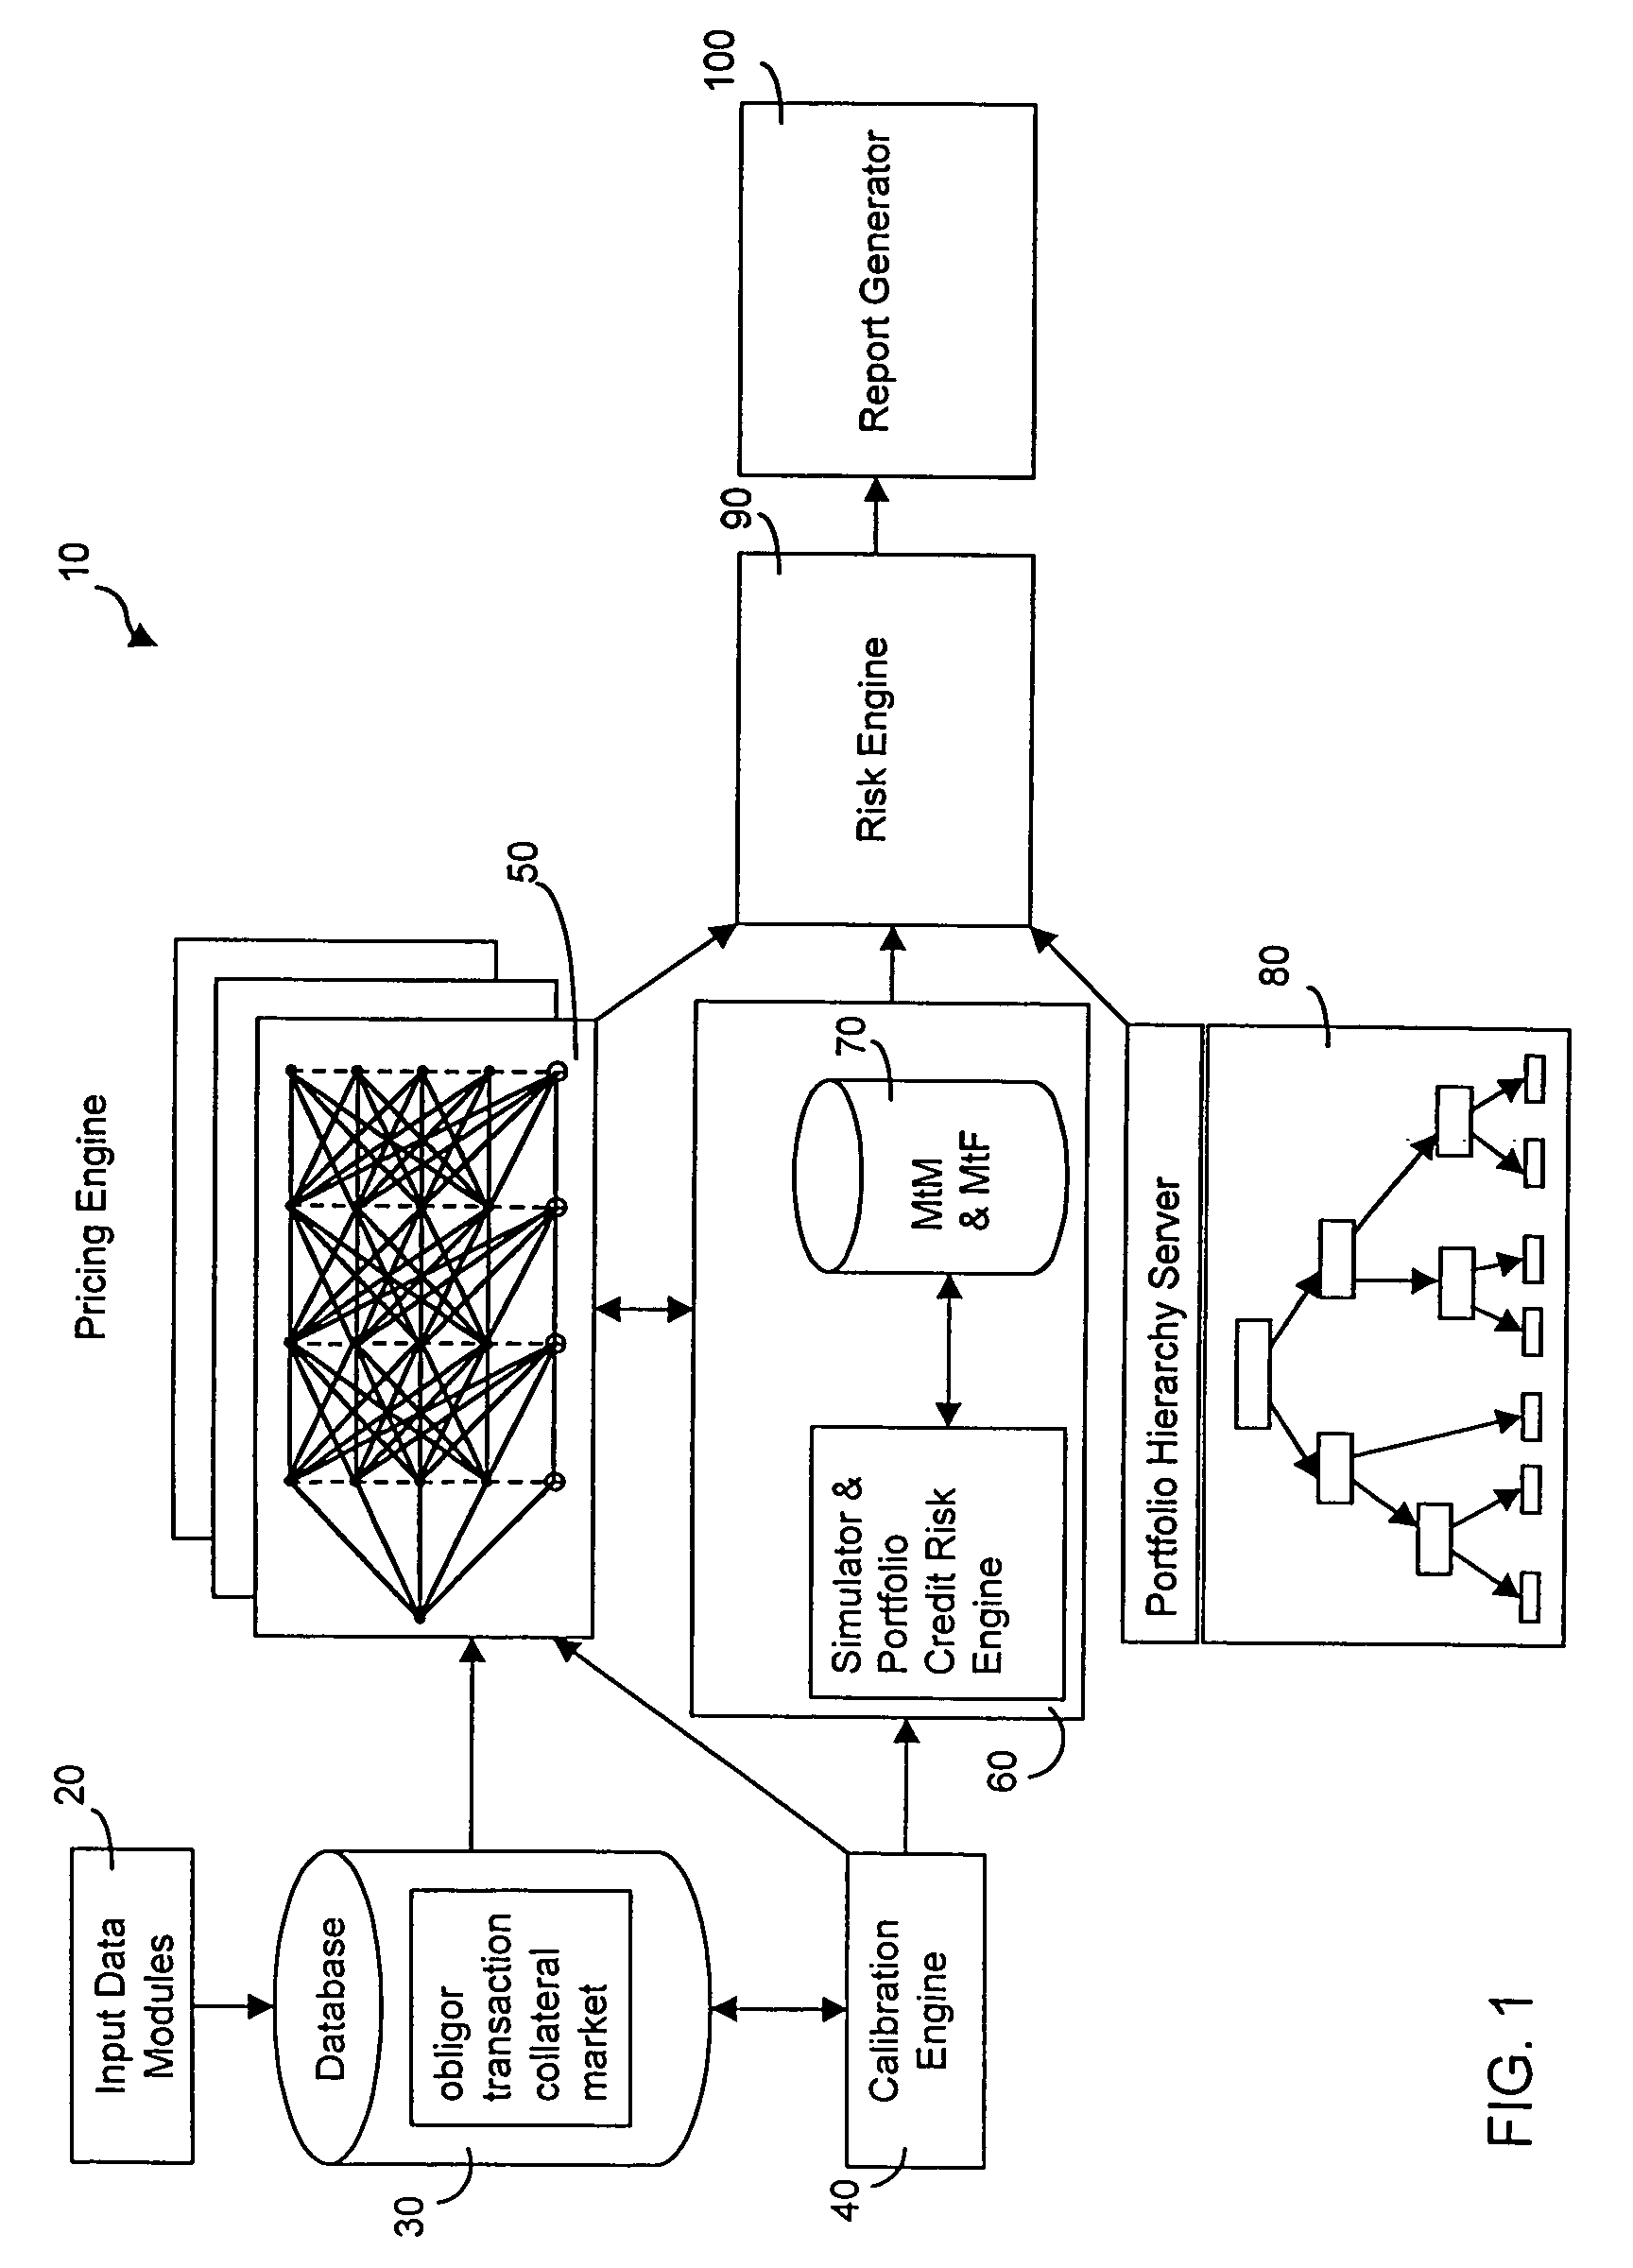 System and methods for valuing and managing the risk of credit instrument portfolios